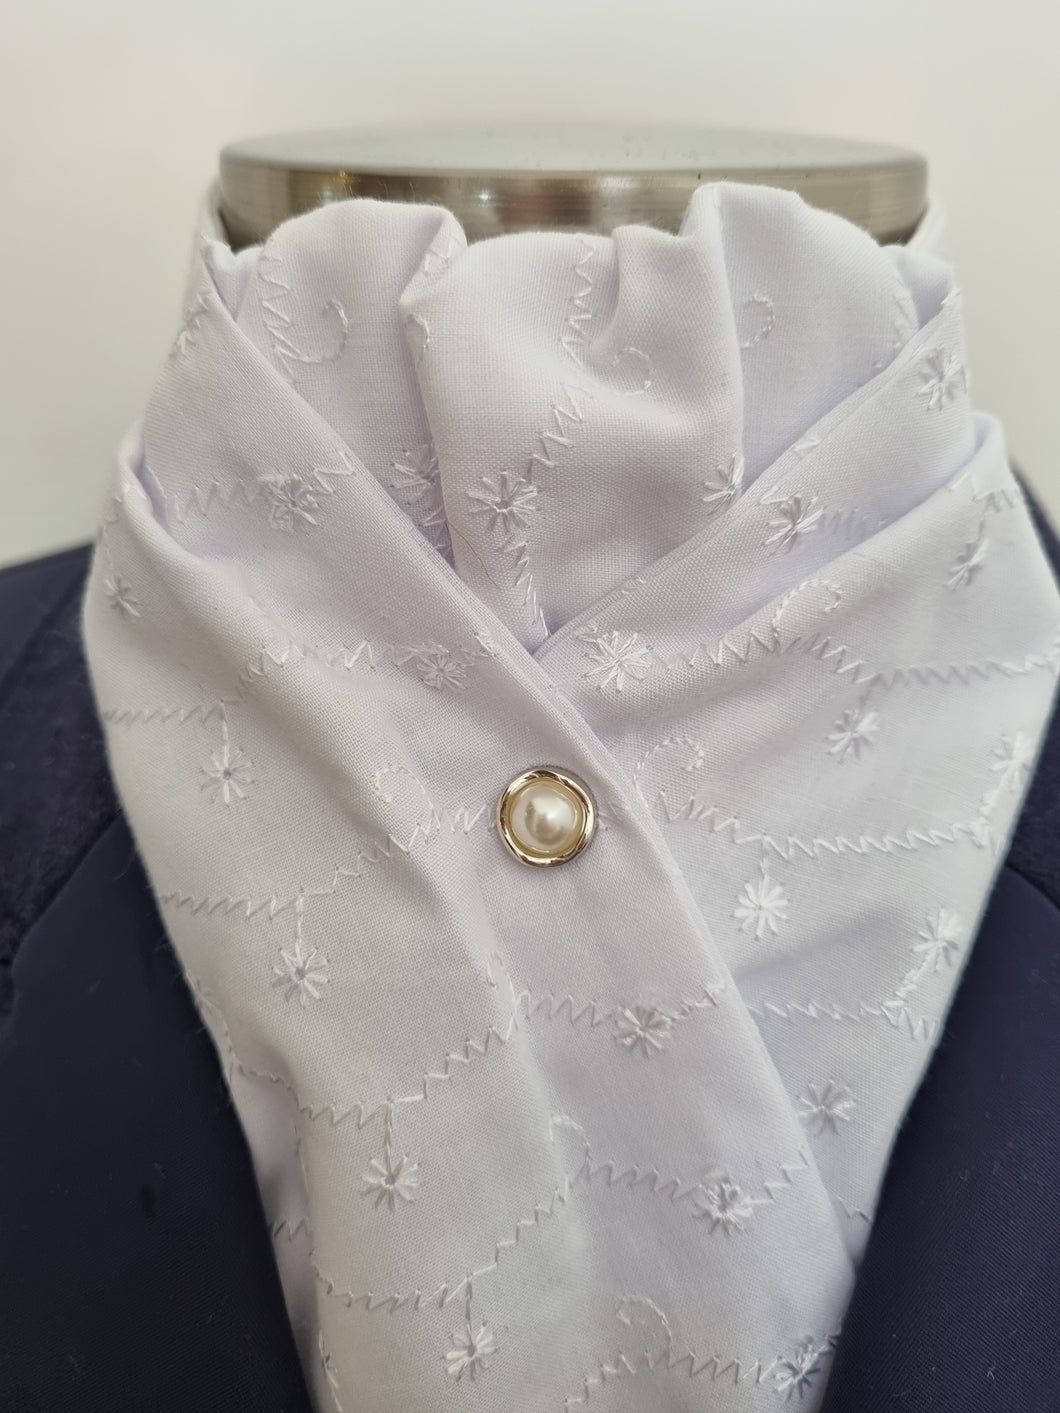 ERA DEB BRODERIE COTTON STOCK TIE - Limited Special Edition - White Broderie cotton with pearl stud pin